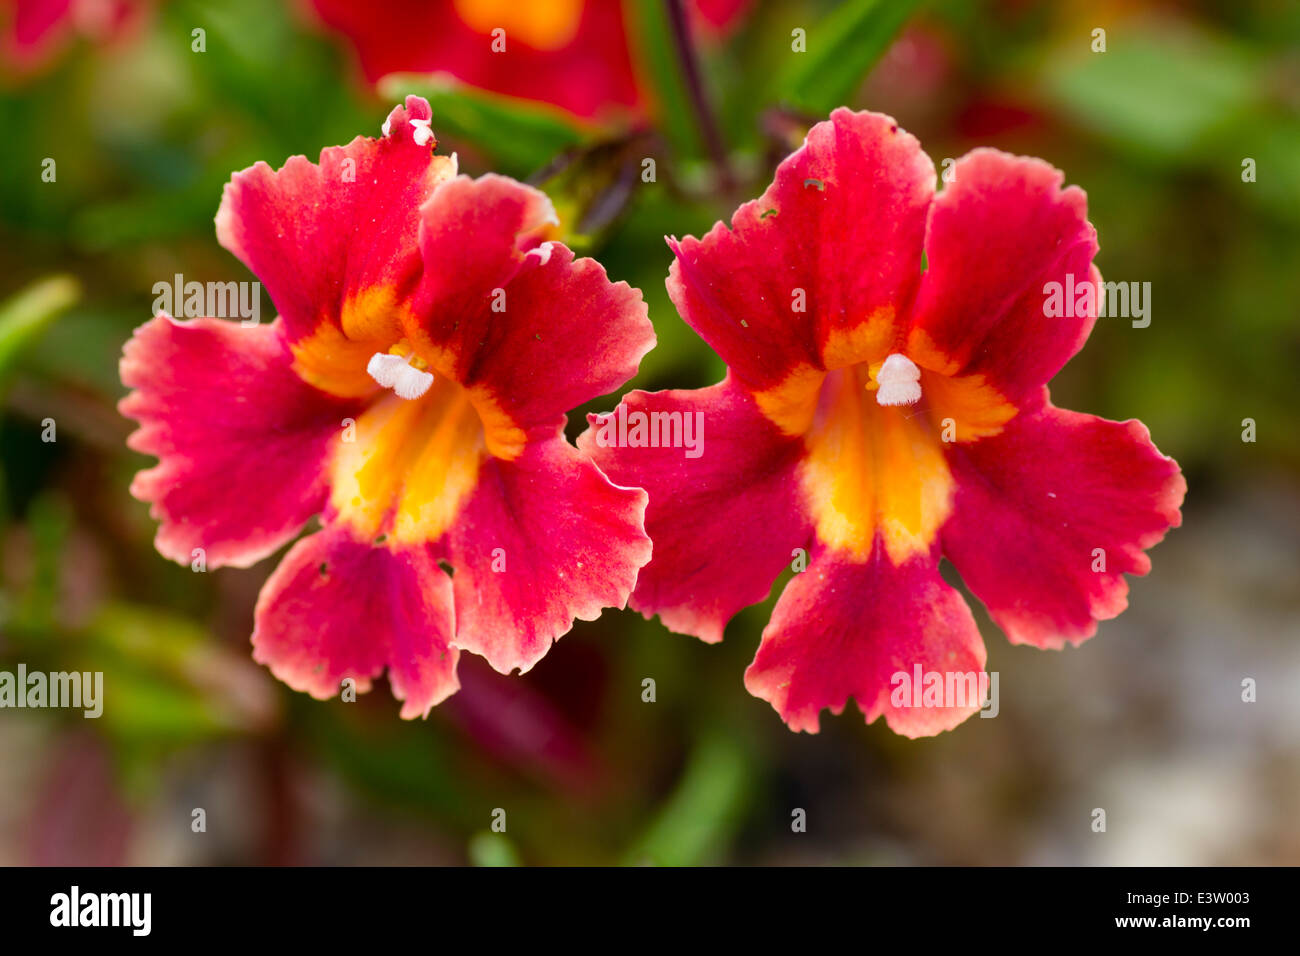 Close up of flowers of the red monkey flower, Diplacus puniceus Stock Photo